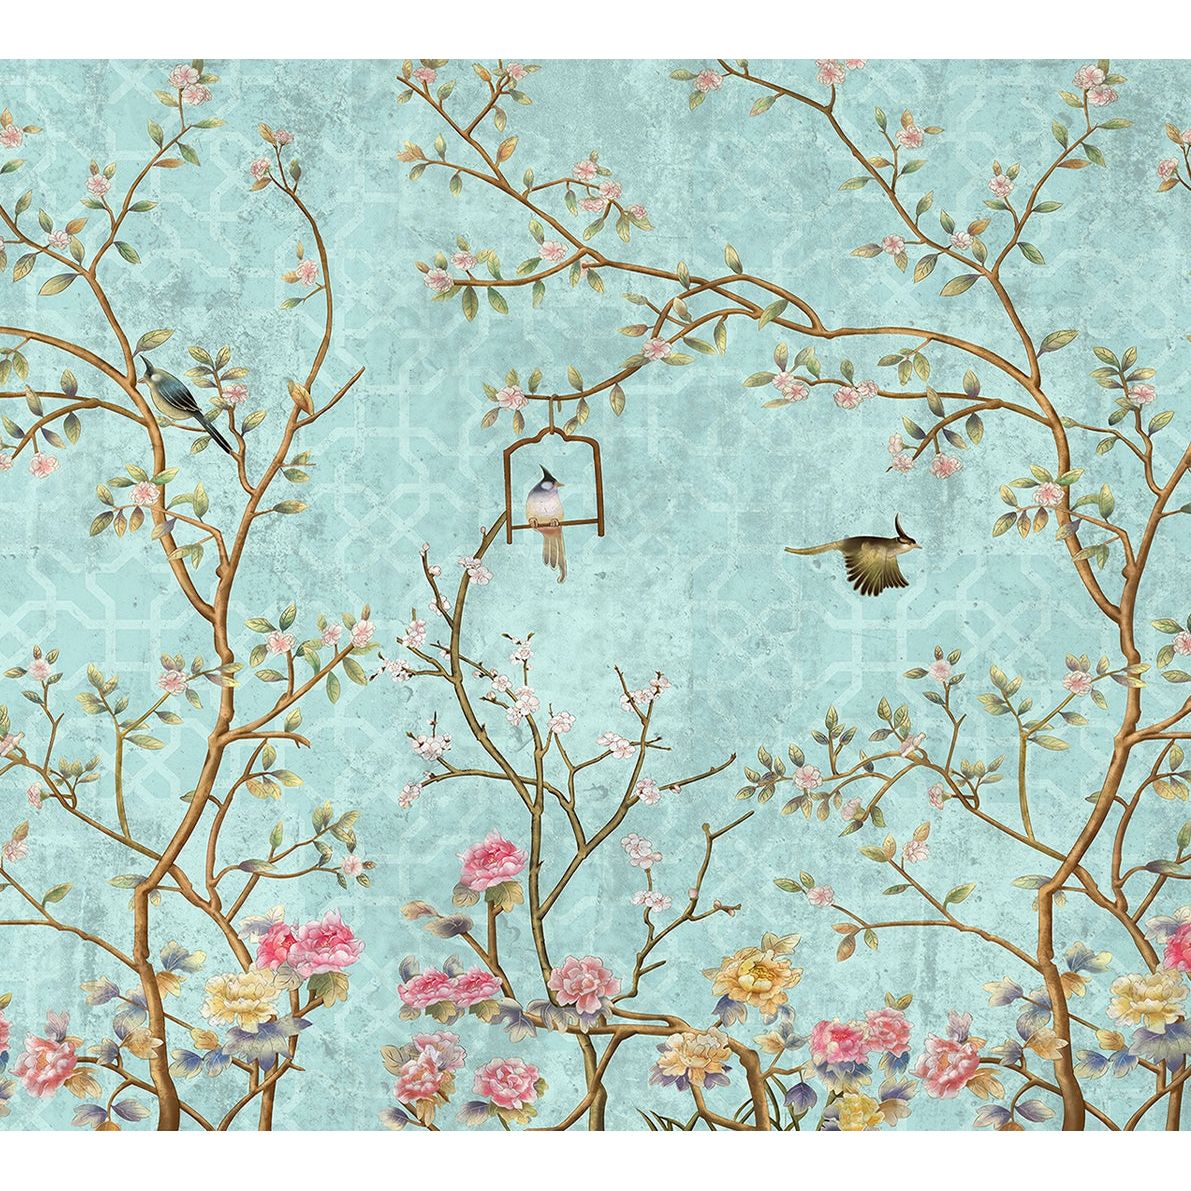 Tranquil Aviary: Light Blue Branches & Birds Wall Mural